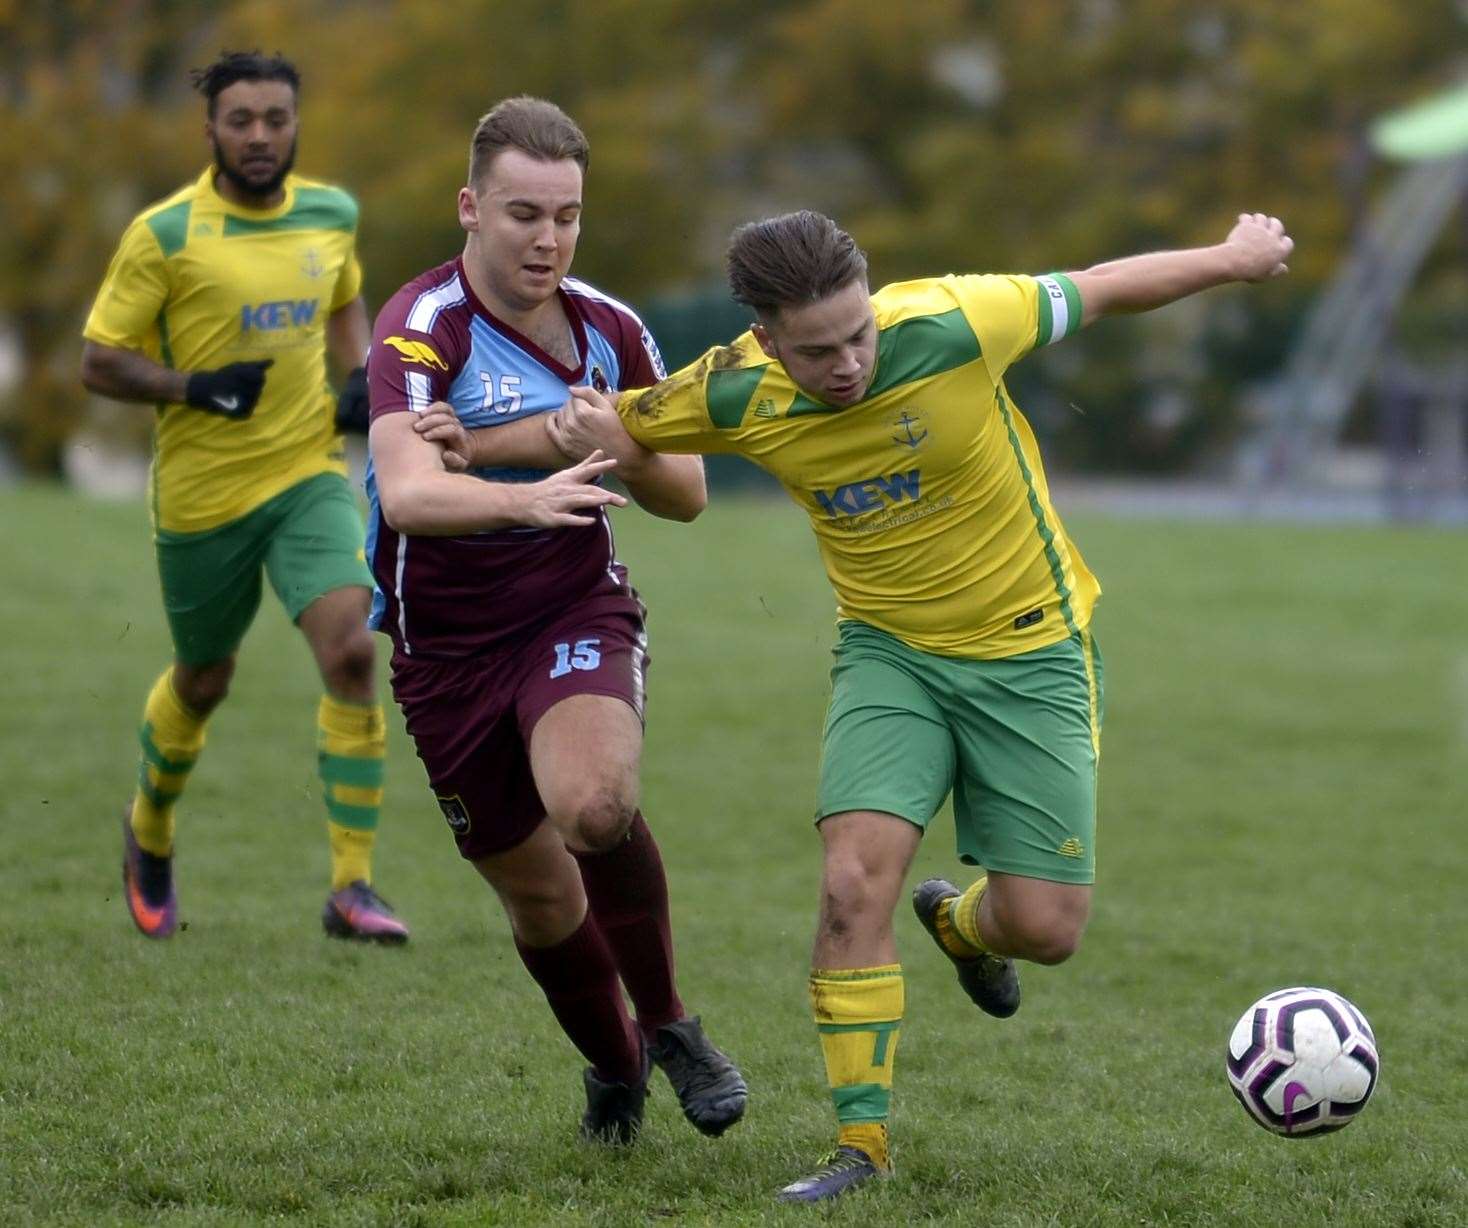 Medway Rovers 17 (green/yellow) hold off the attentions of Wigmore on Sunday. Picture: Barry Goodwin (42936805)